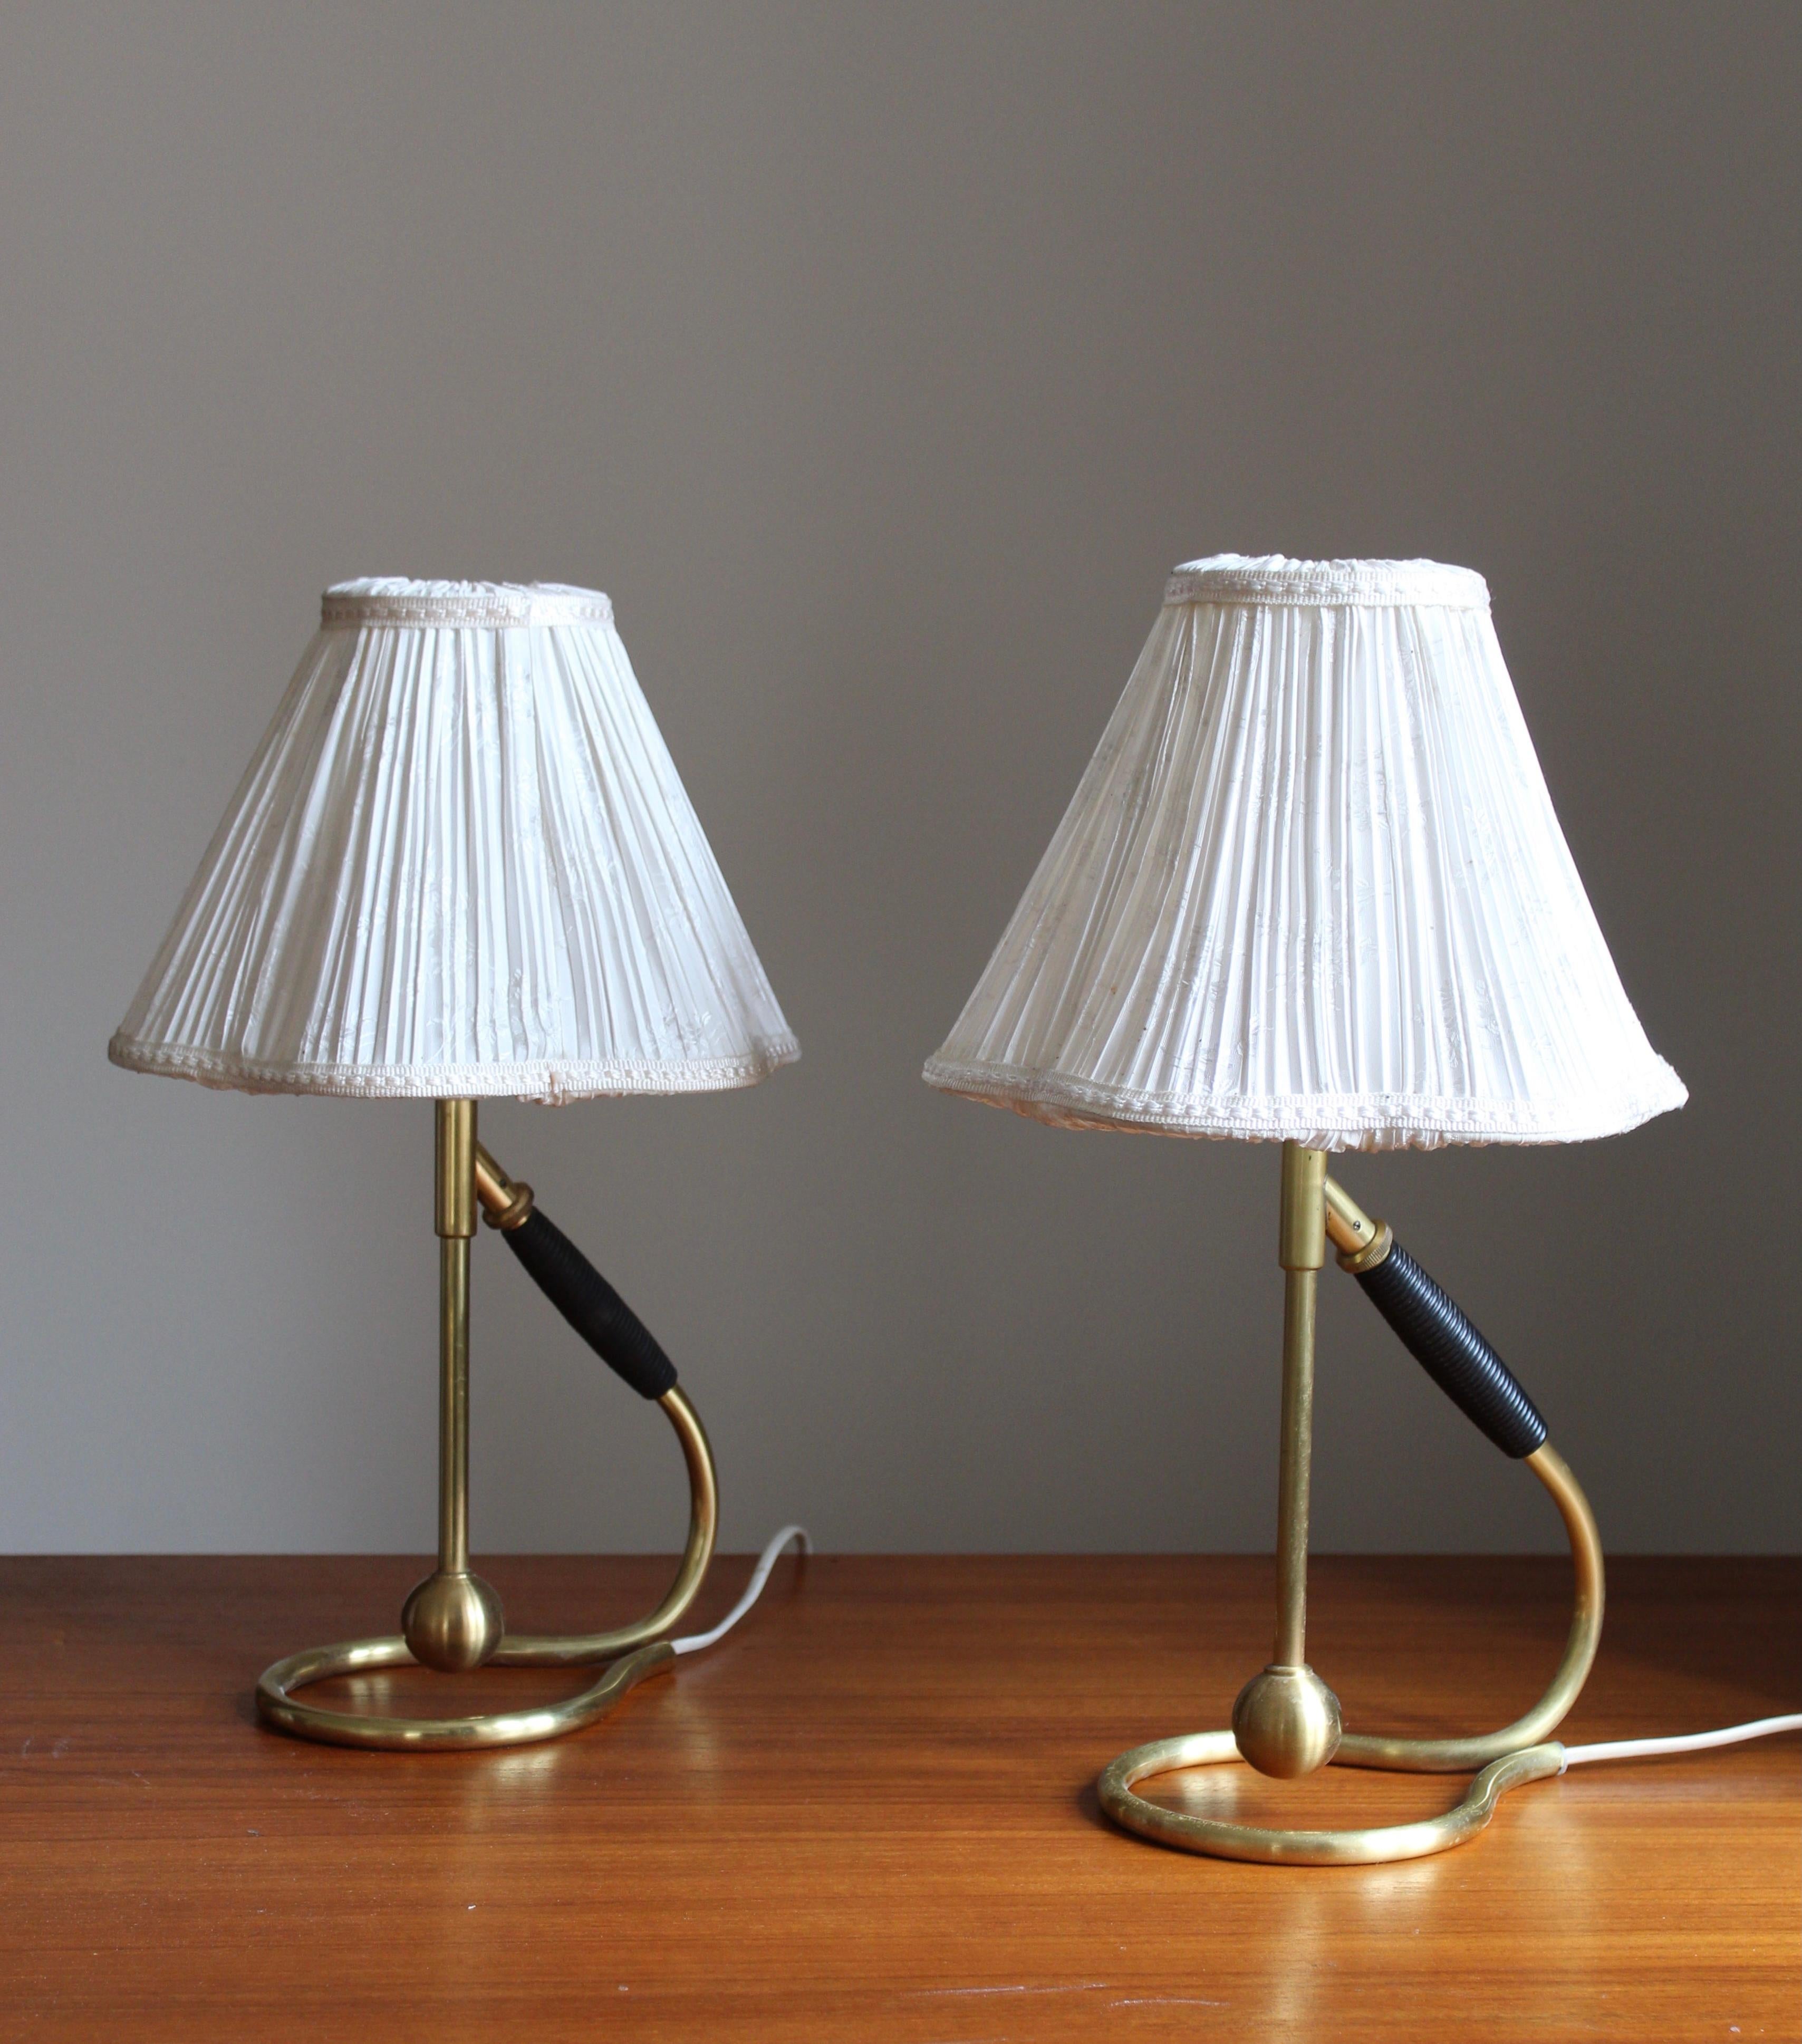 A vintage table lamp by Kaare Klint for Le Klint. Designed in the 1940s. This example produced, circa 1950s-1960s.

With vintage lampshades.

Other designers of the period include Paavo Tynell, Alvar Aalto, Josef Frank, Hans Bergström, and Gino